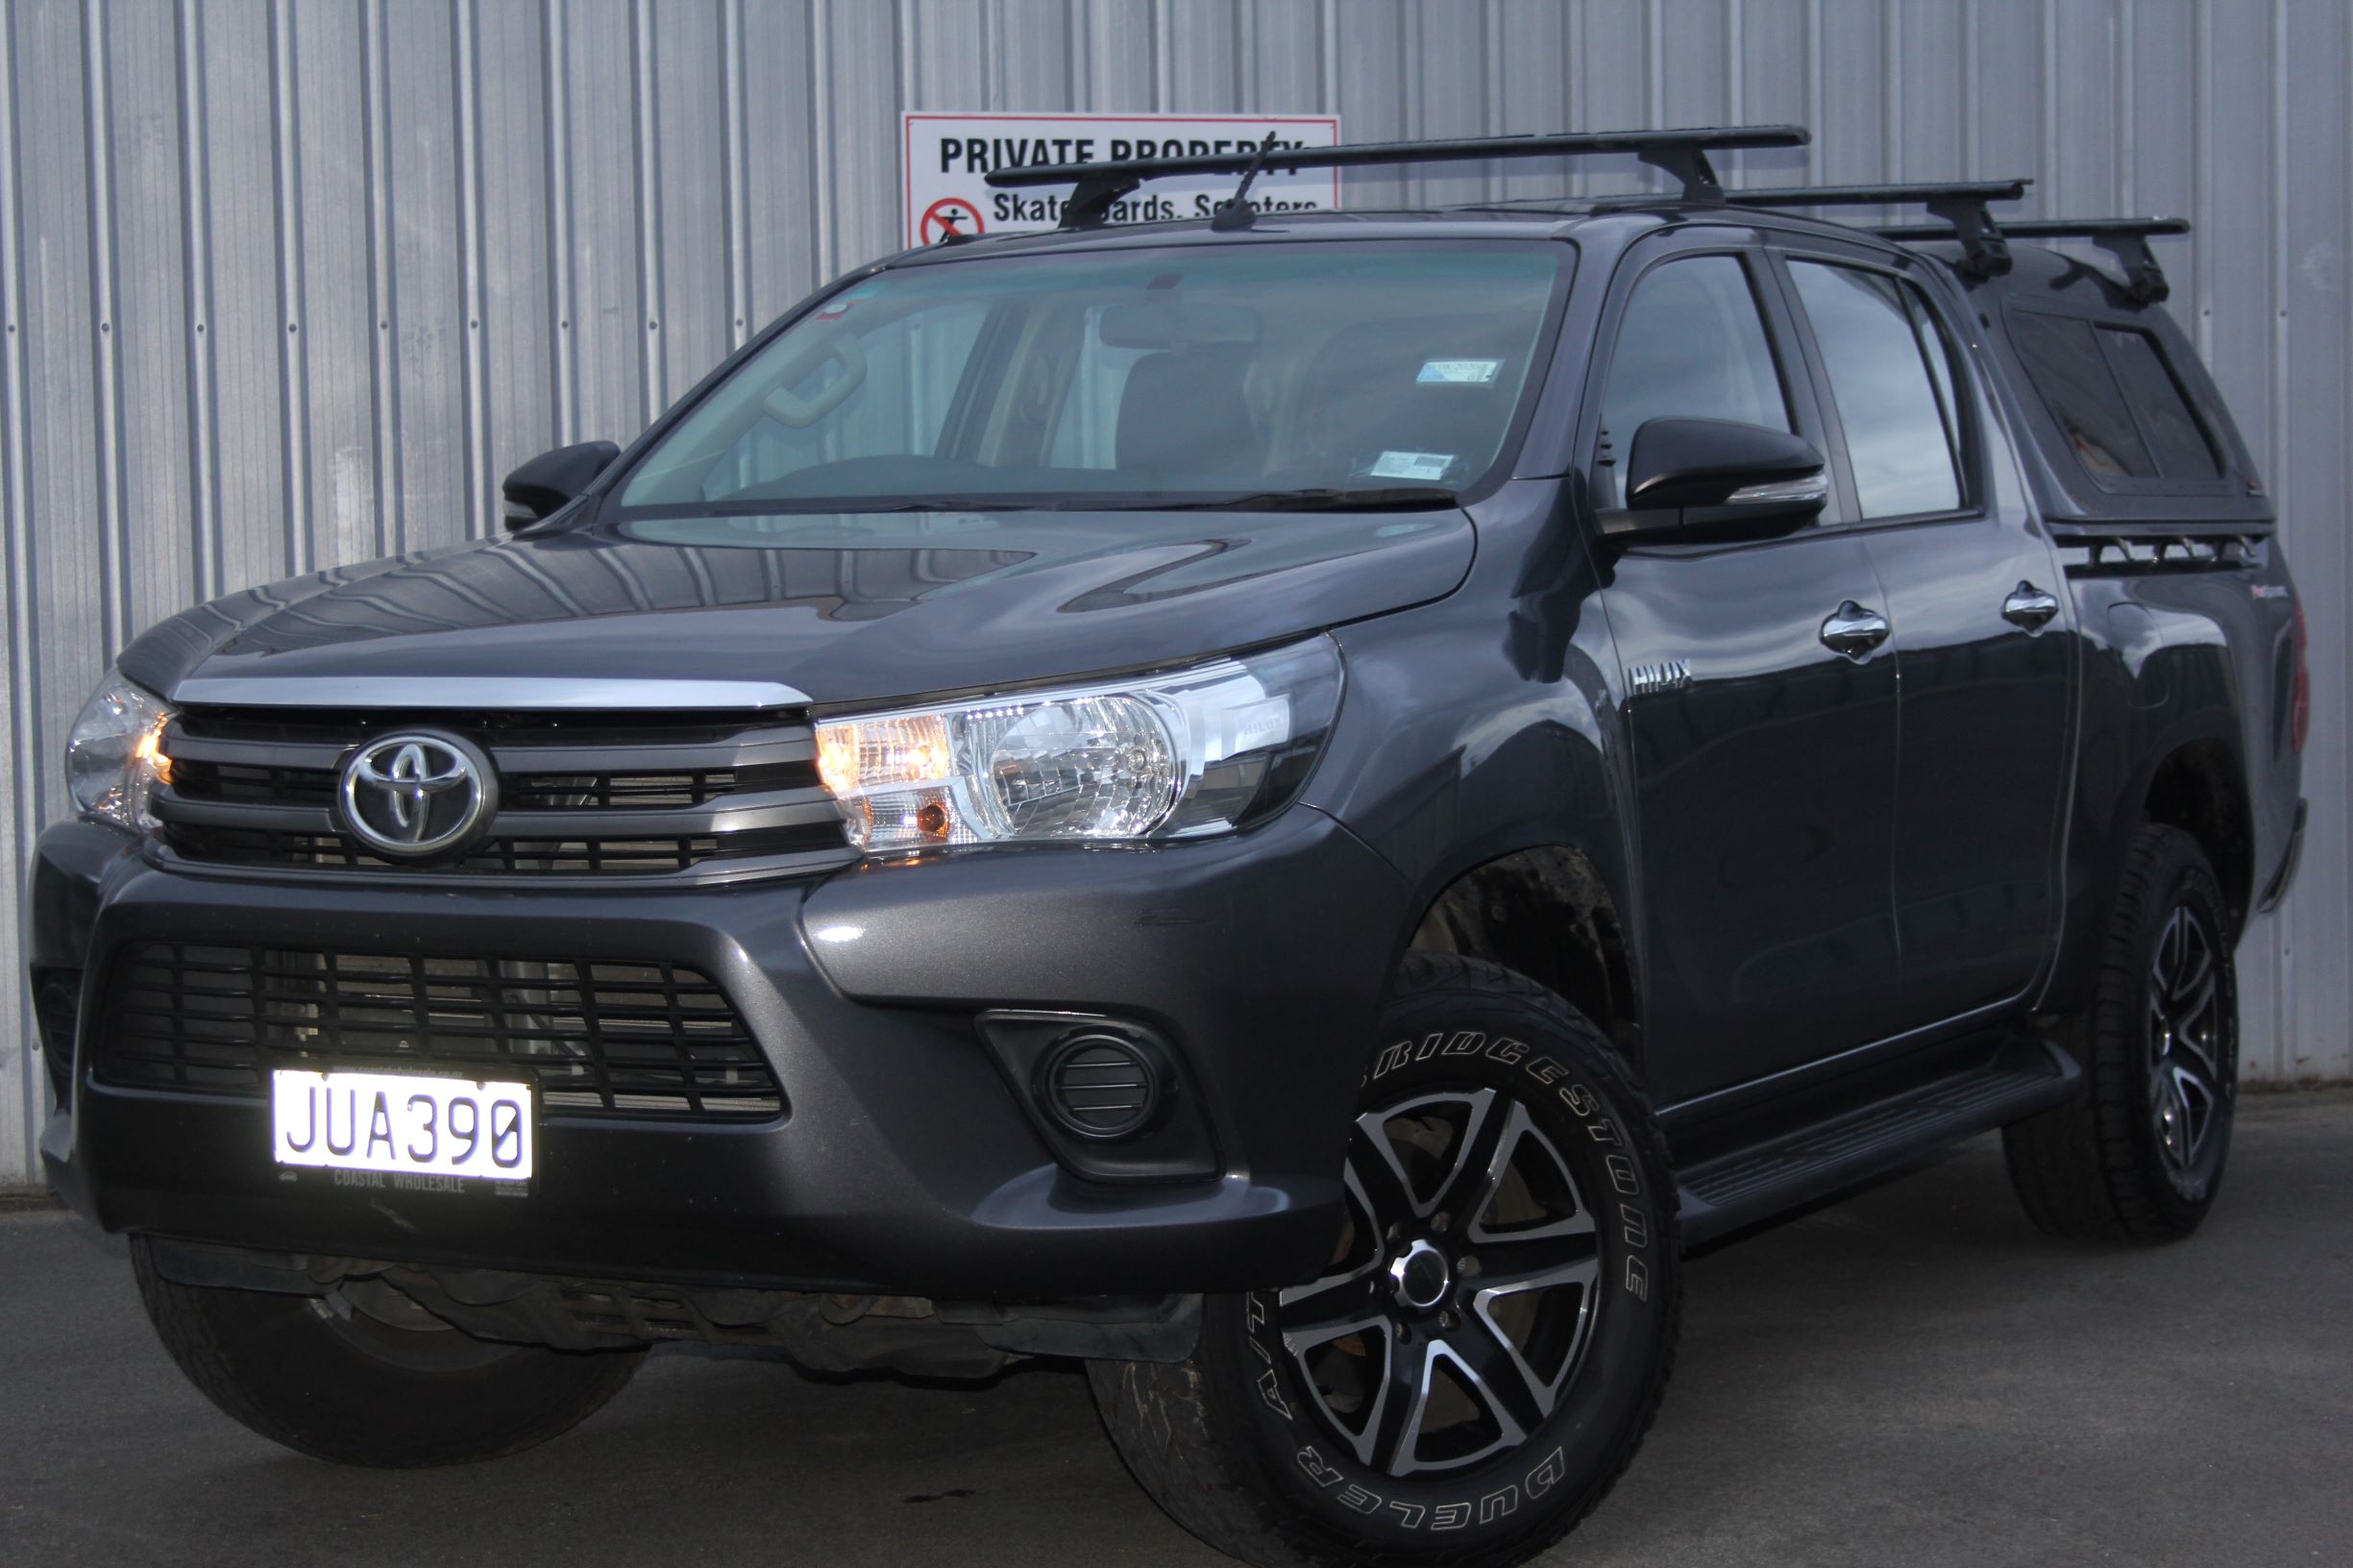 Toyota Hilux 2WD SR 2016 for sale in Auckland